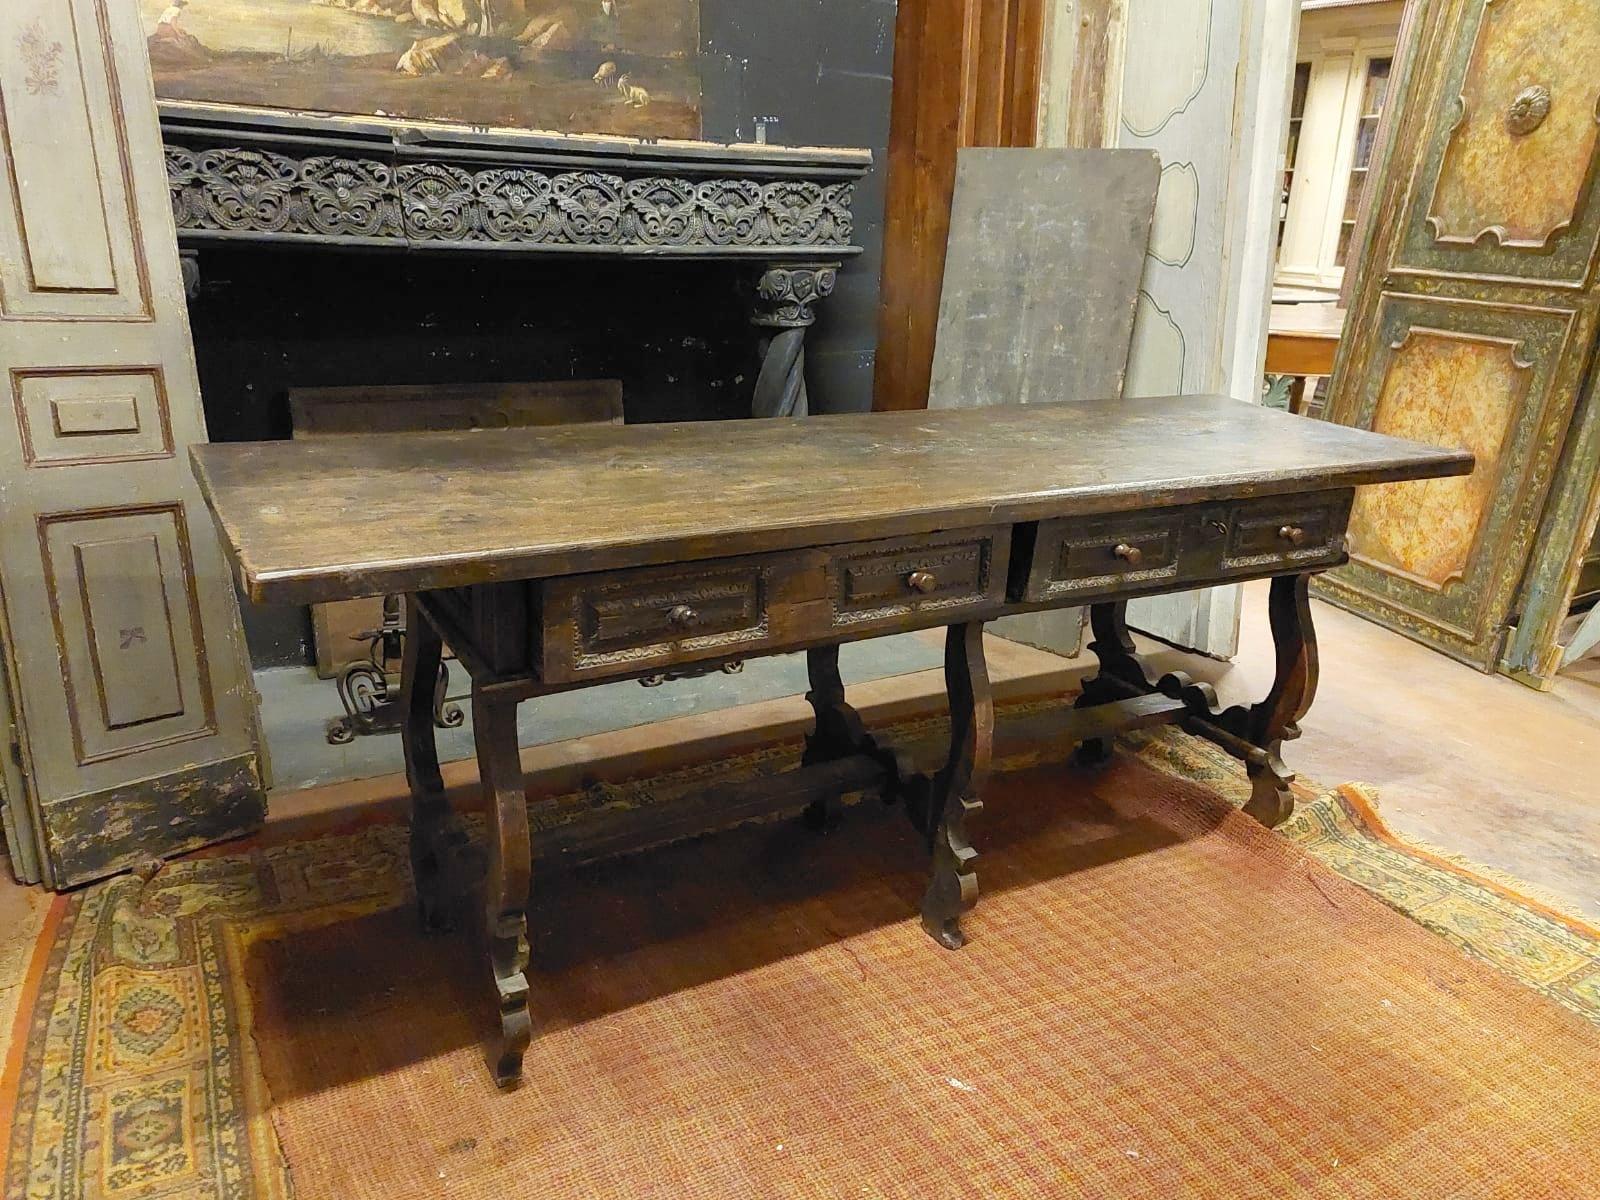 Antique solid walnut table, complete with drawers, richly carved both in the borders and in the wavy legs (typical of the refectory), built entirely by hand in the 18th century, from Spain.
Ideal both as a support table, in a classic kitchen or as